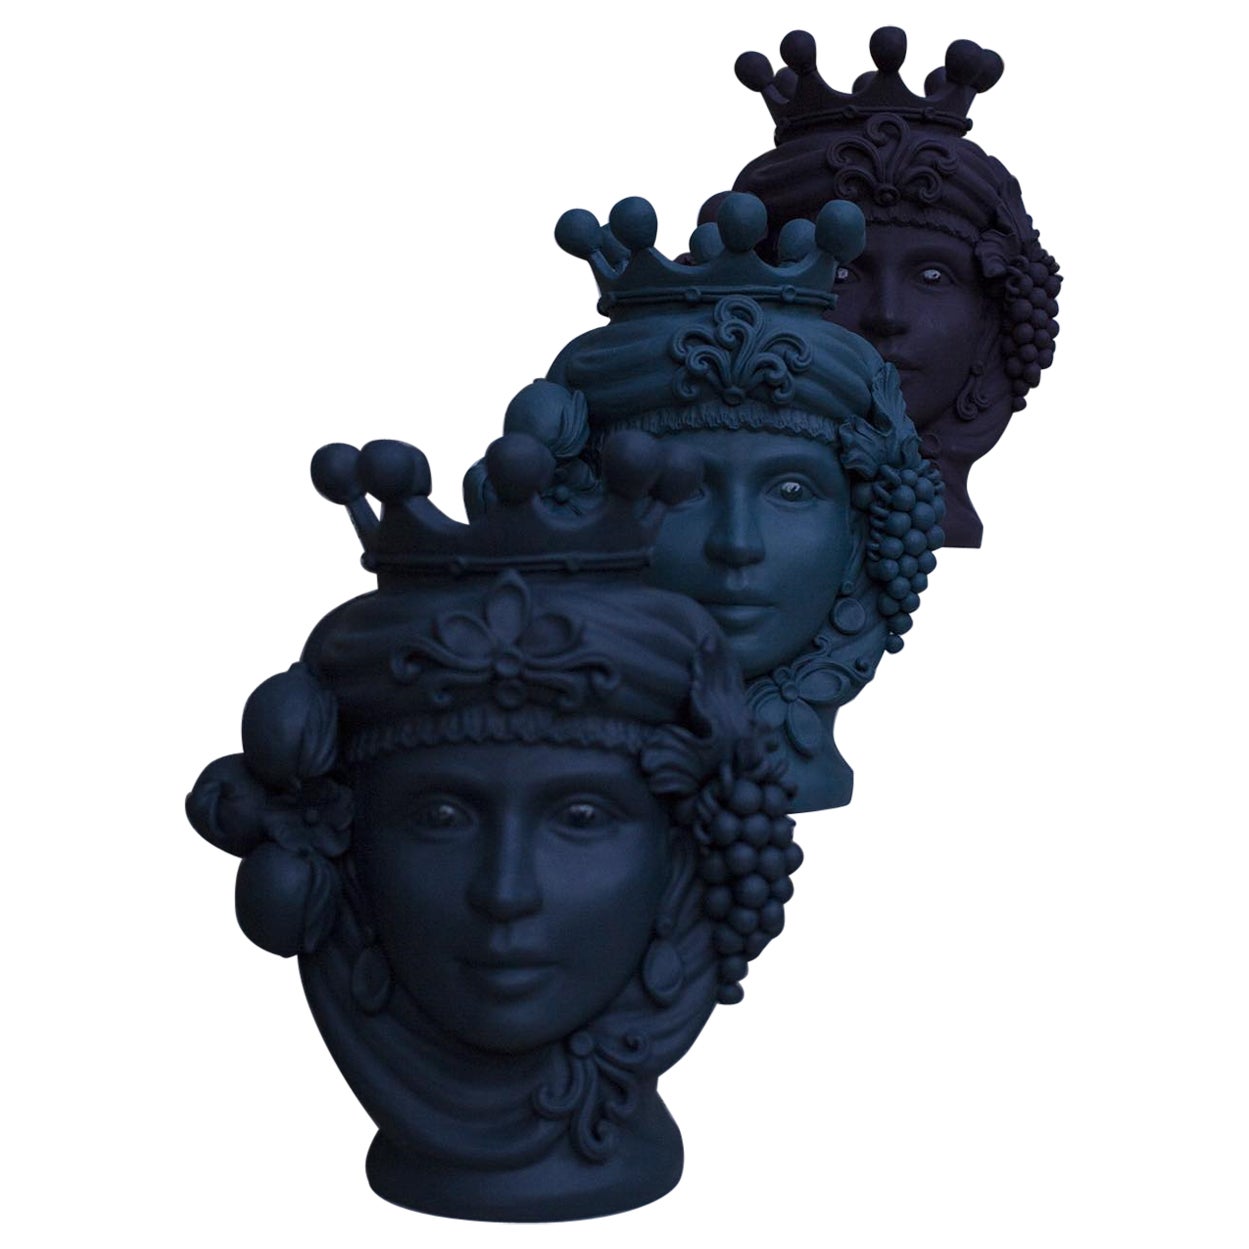 Moorish Heads Vases Collection "Catania Green", Set of 3, Handmade in Italy For Sale